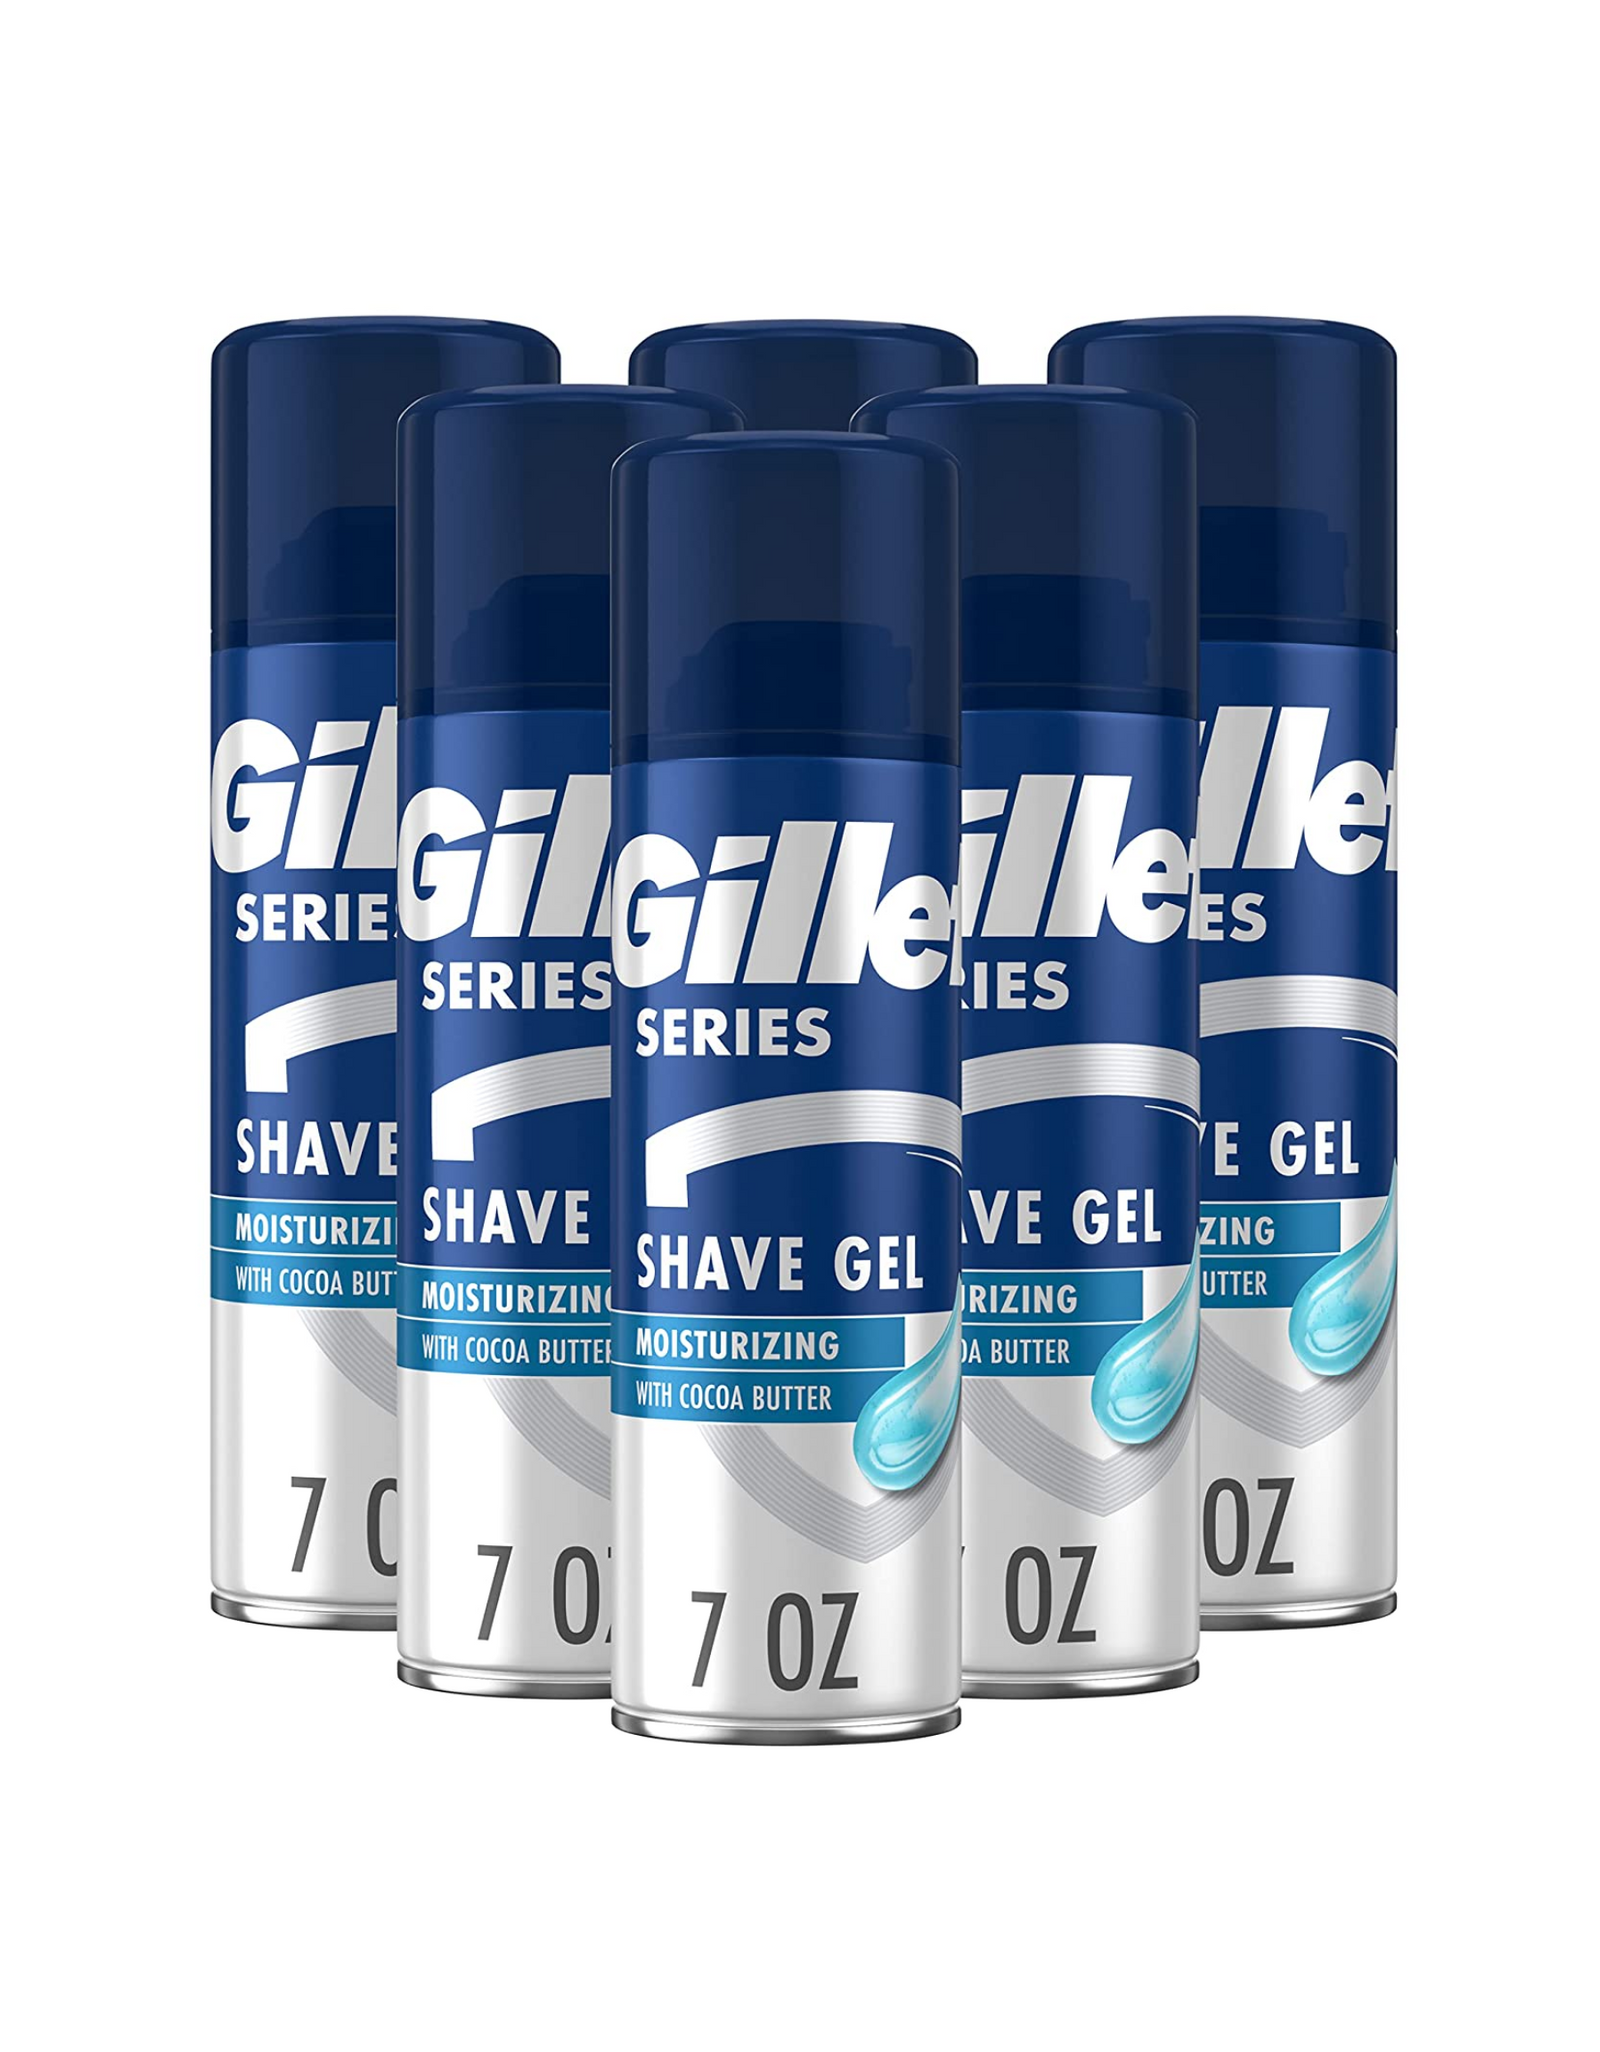 Gillette Series 3X Moisturizing Shave Gel, Lubrication to Protect Against Irritation, Blue-White, 7oz Each (Pack of 6)